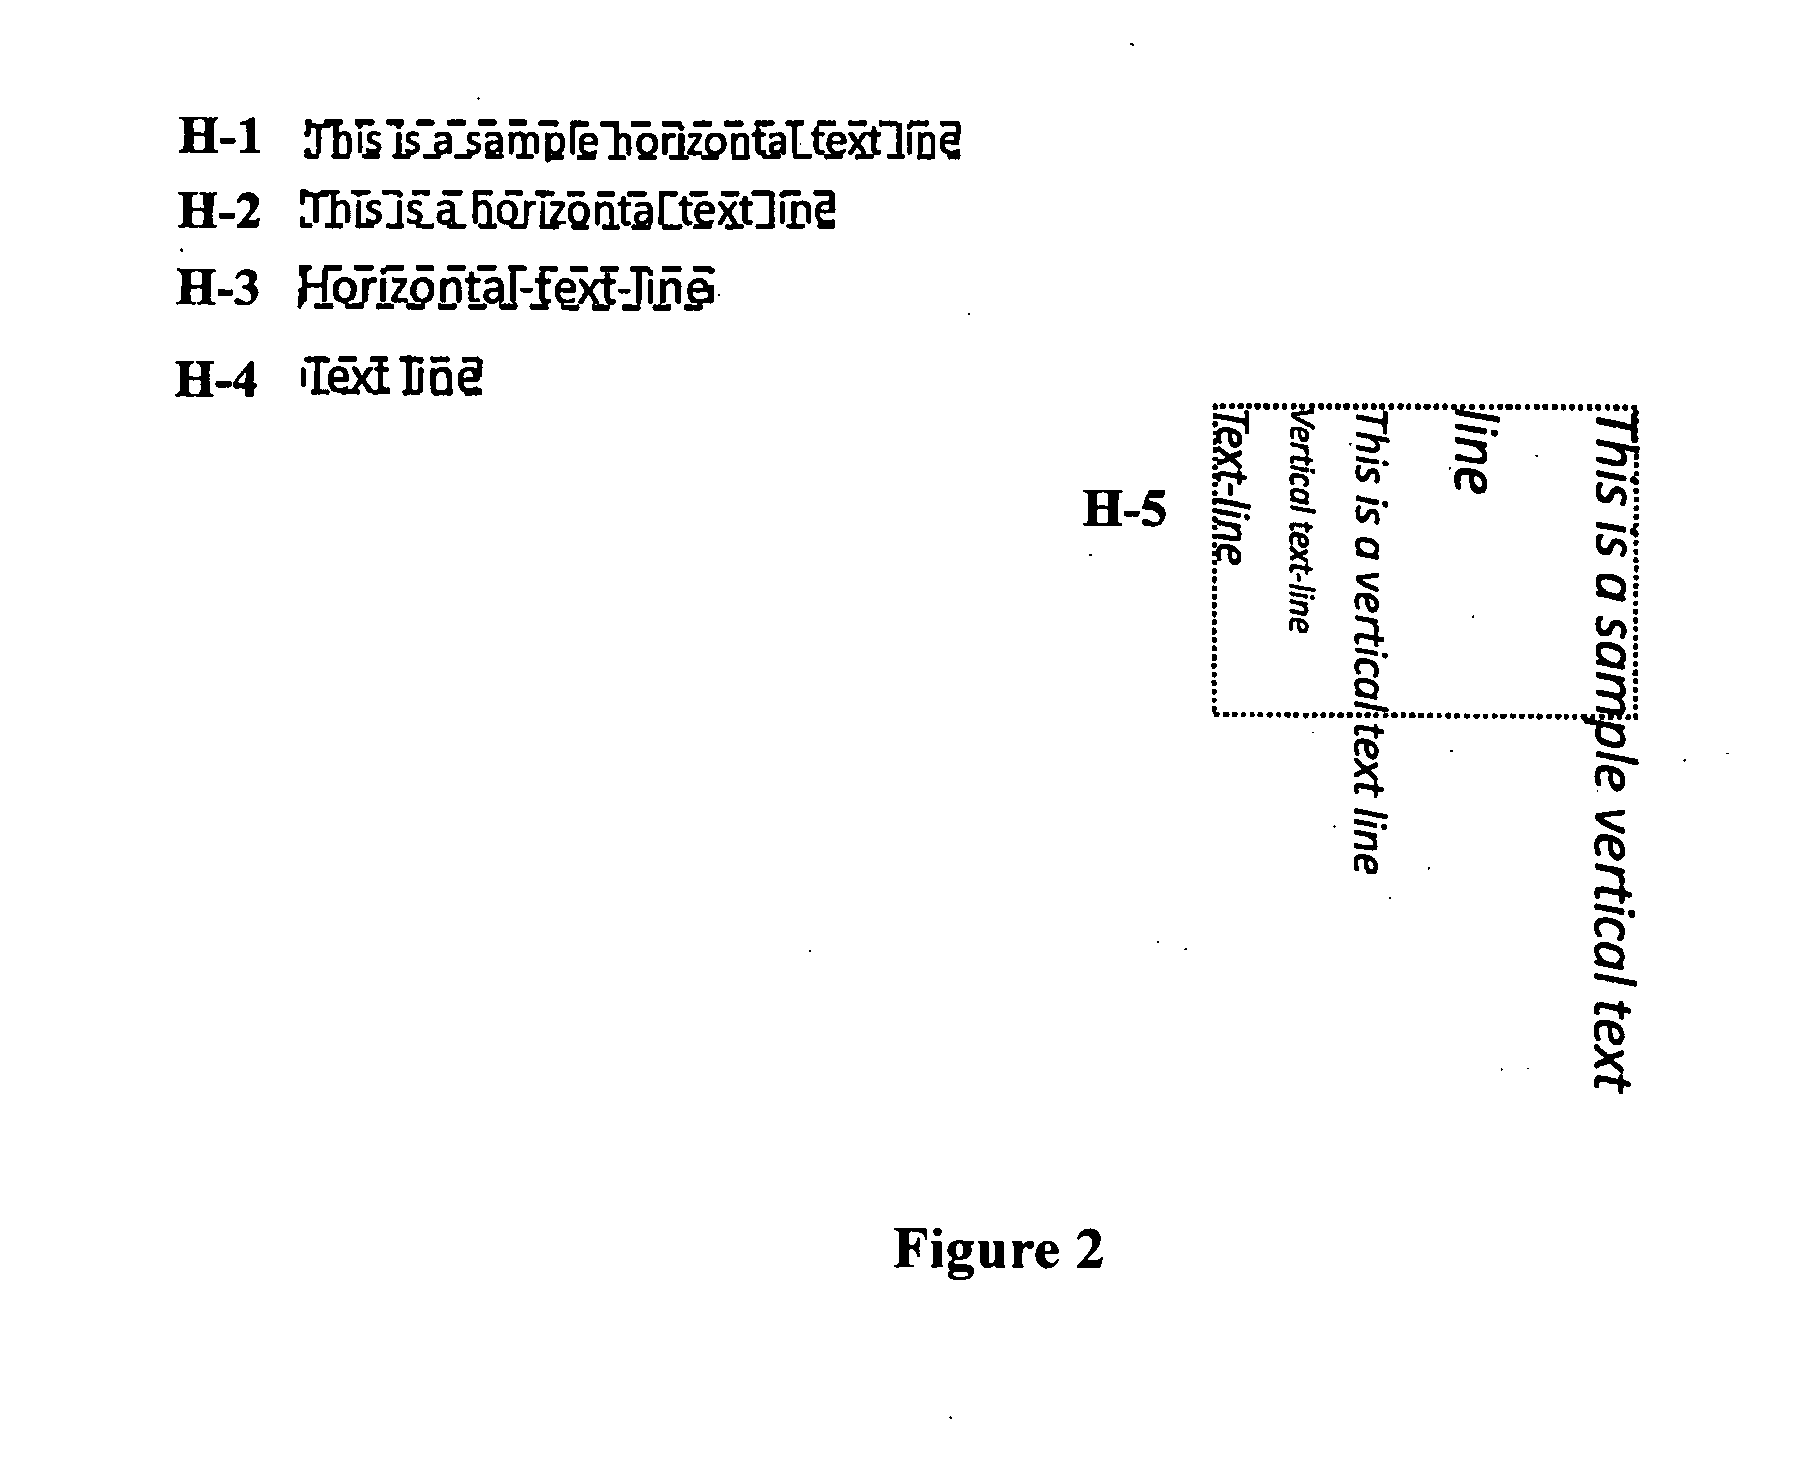 Document image processing method and apparatus